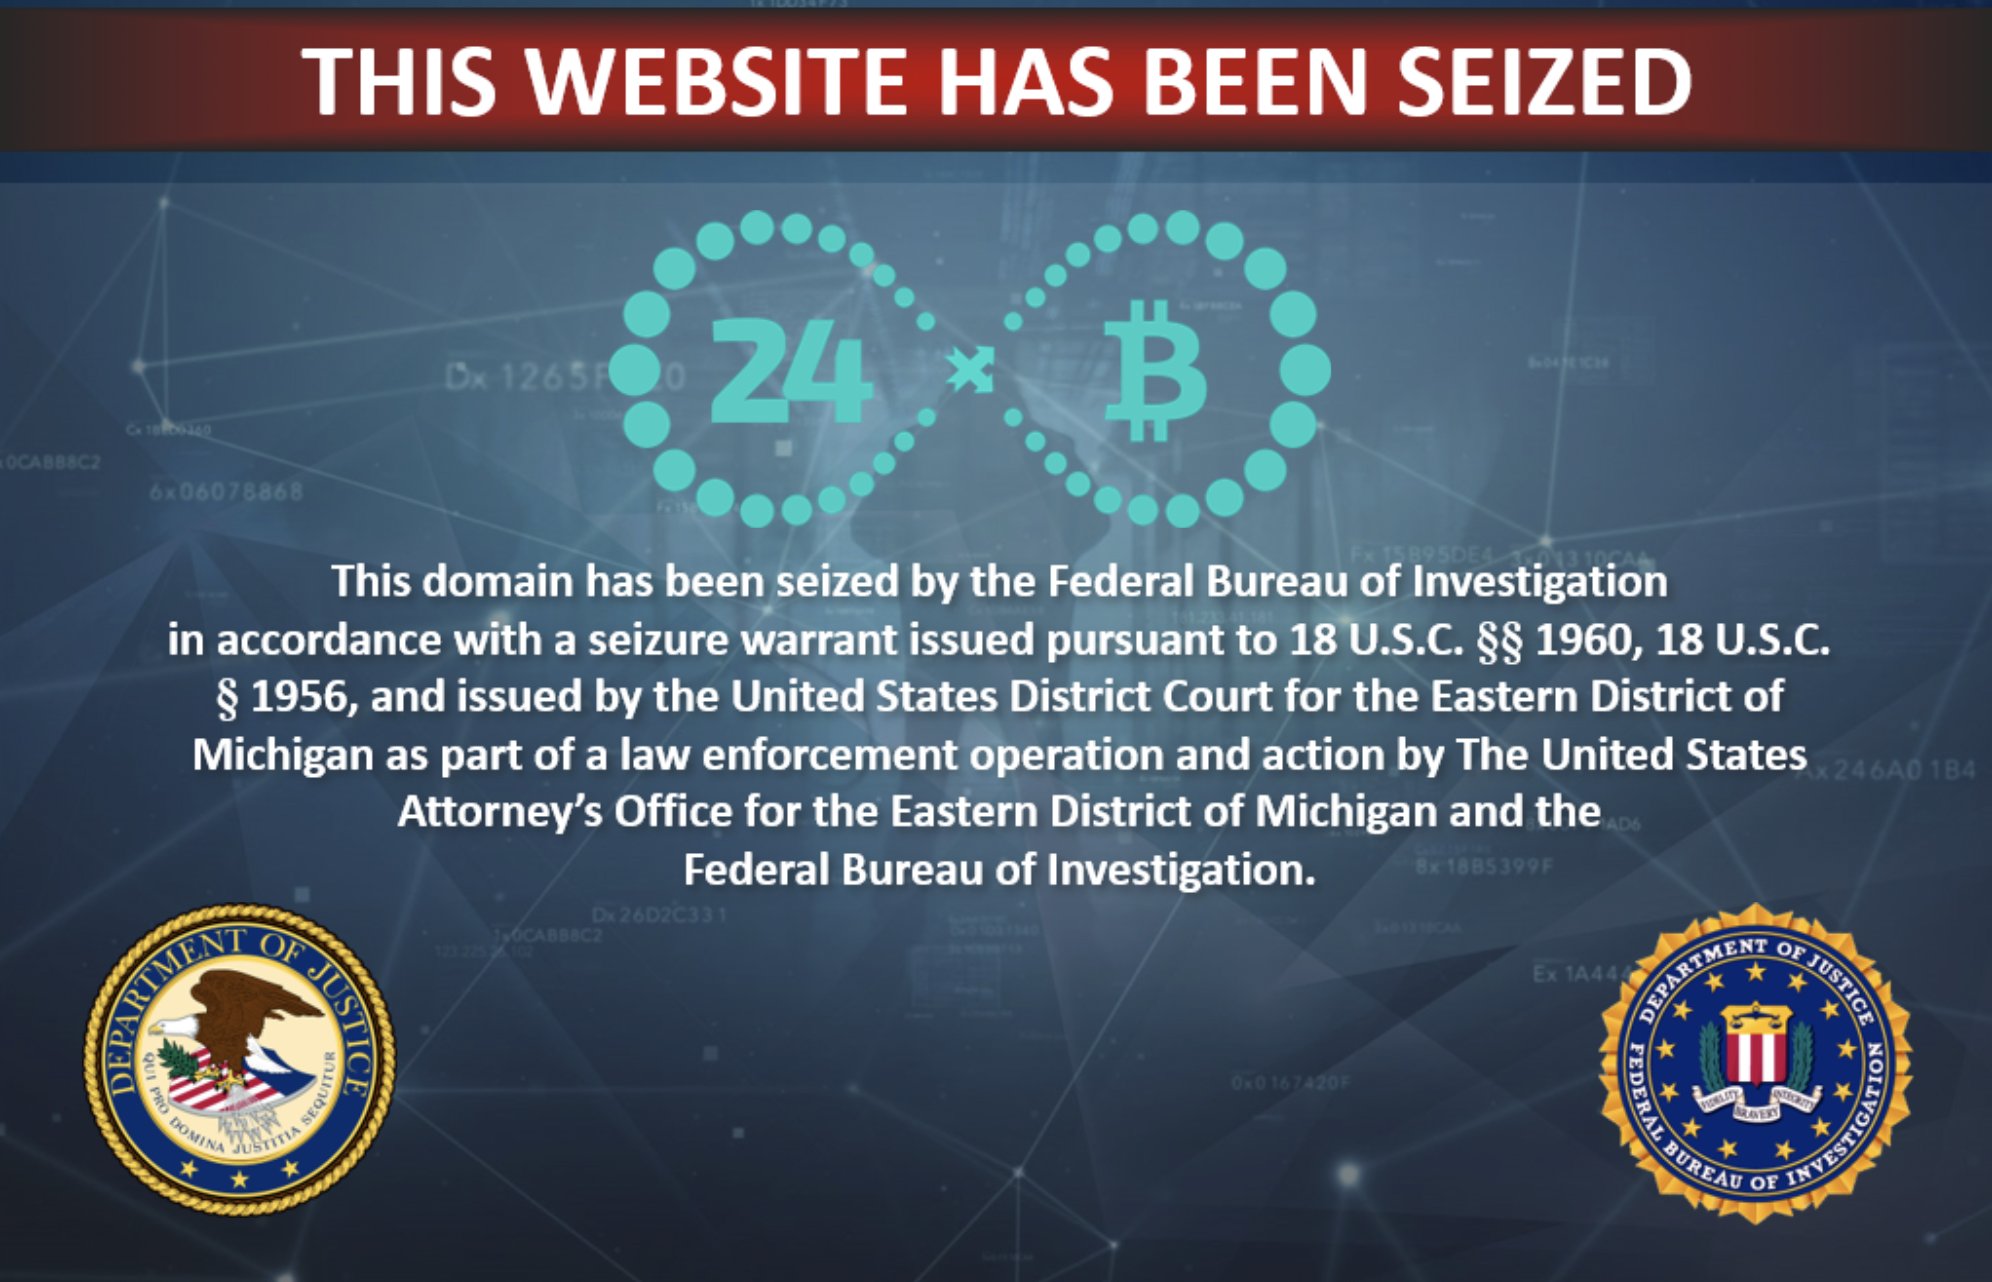 FBI DISRUPTS VIRTUAL CURRENCY EXCHANGES USED TO FACILITATE CRIMINAL ACTIVITY